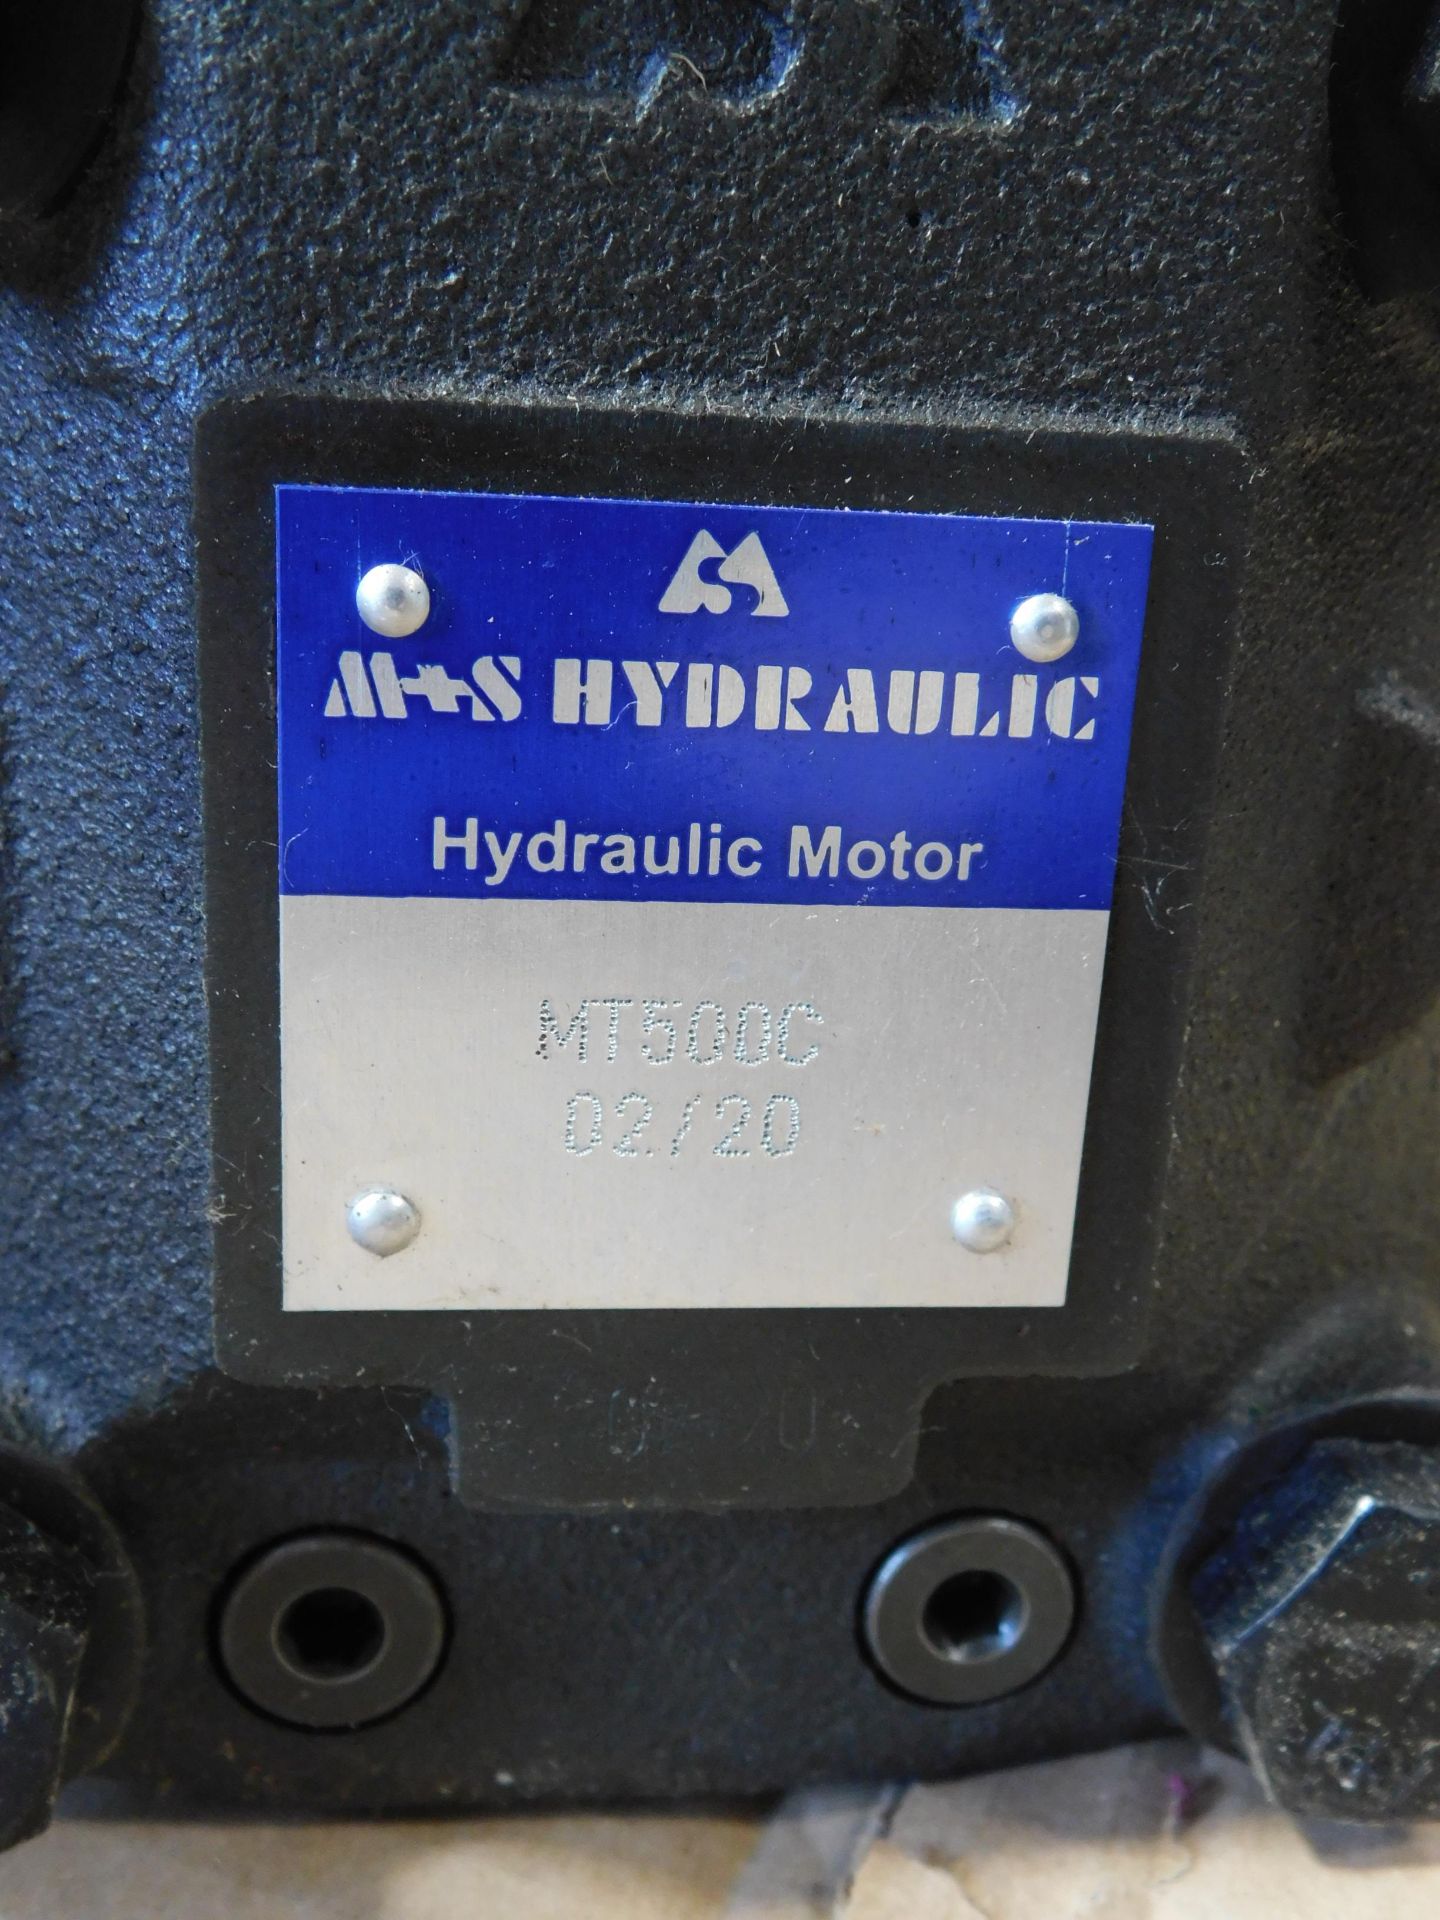 M+S MT500C Hydraulic Motor 02/2020 (Location: Brentwood. Please Refer to General Notes) - Bild 2 aus 2